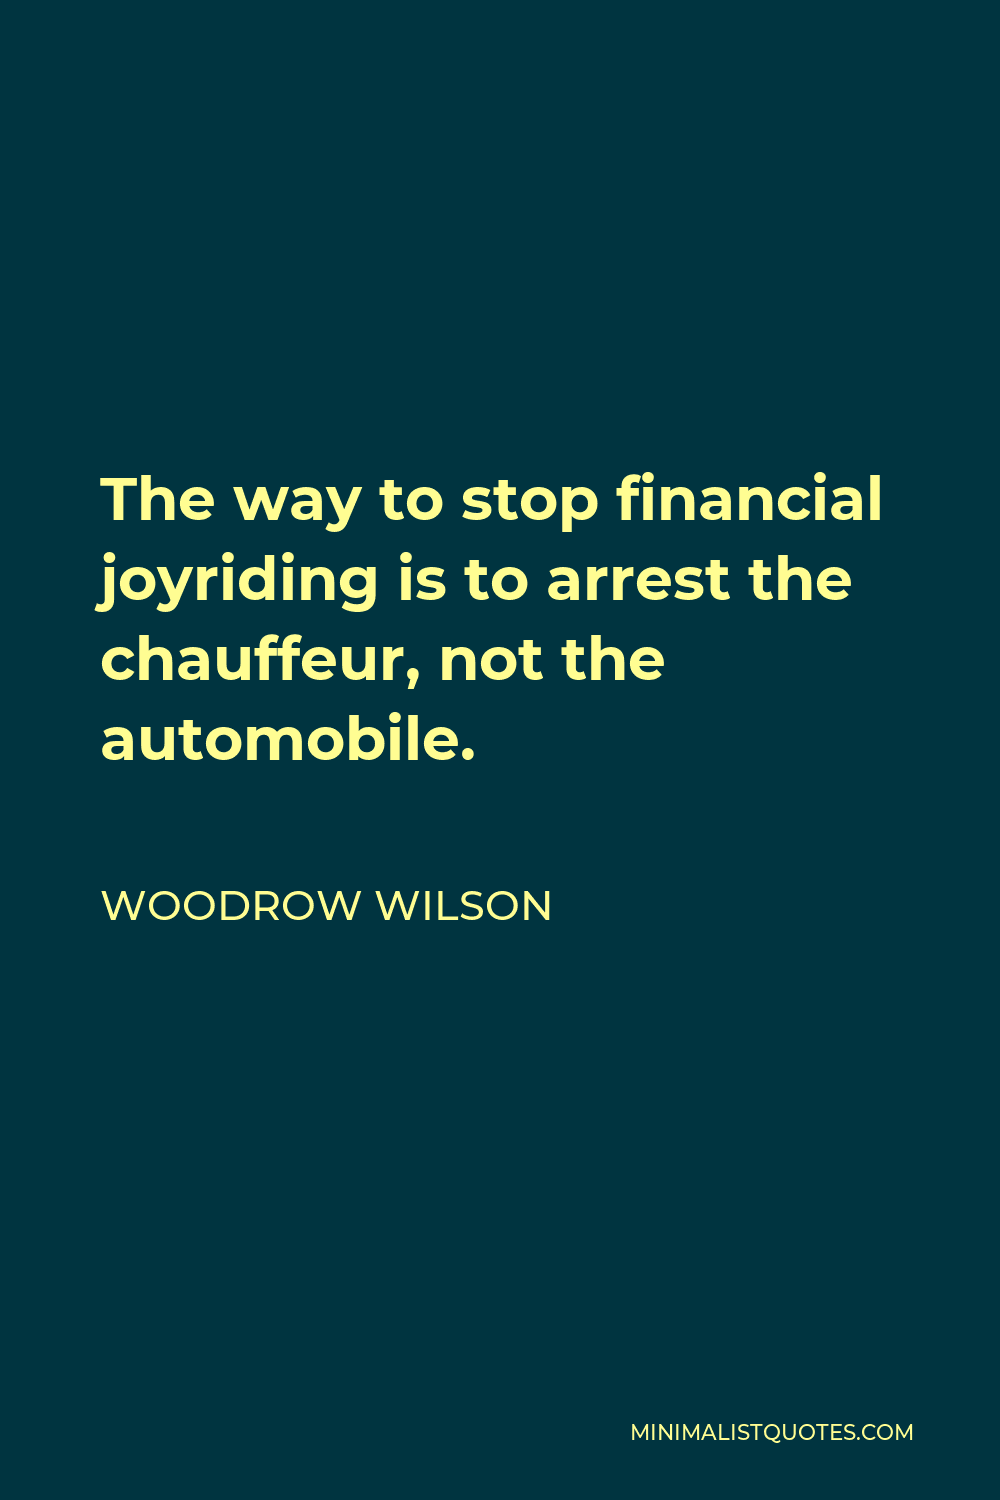 Woodrow Wilson Quote - The way to stop financial joyriding is to arrest the chauffeur, not the automobile.